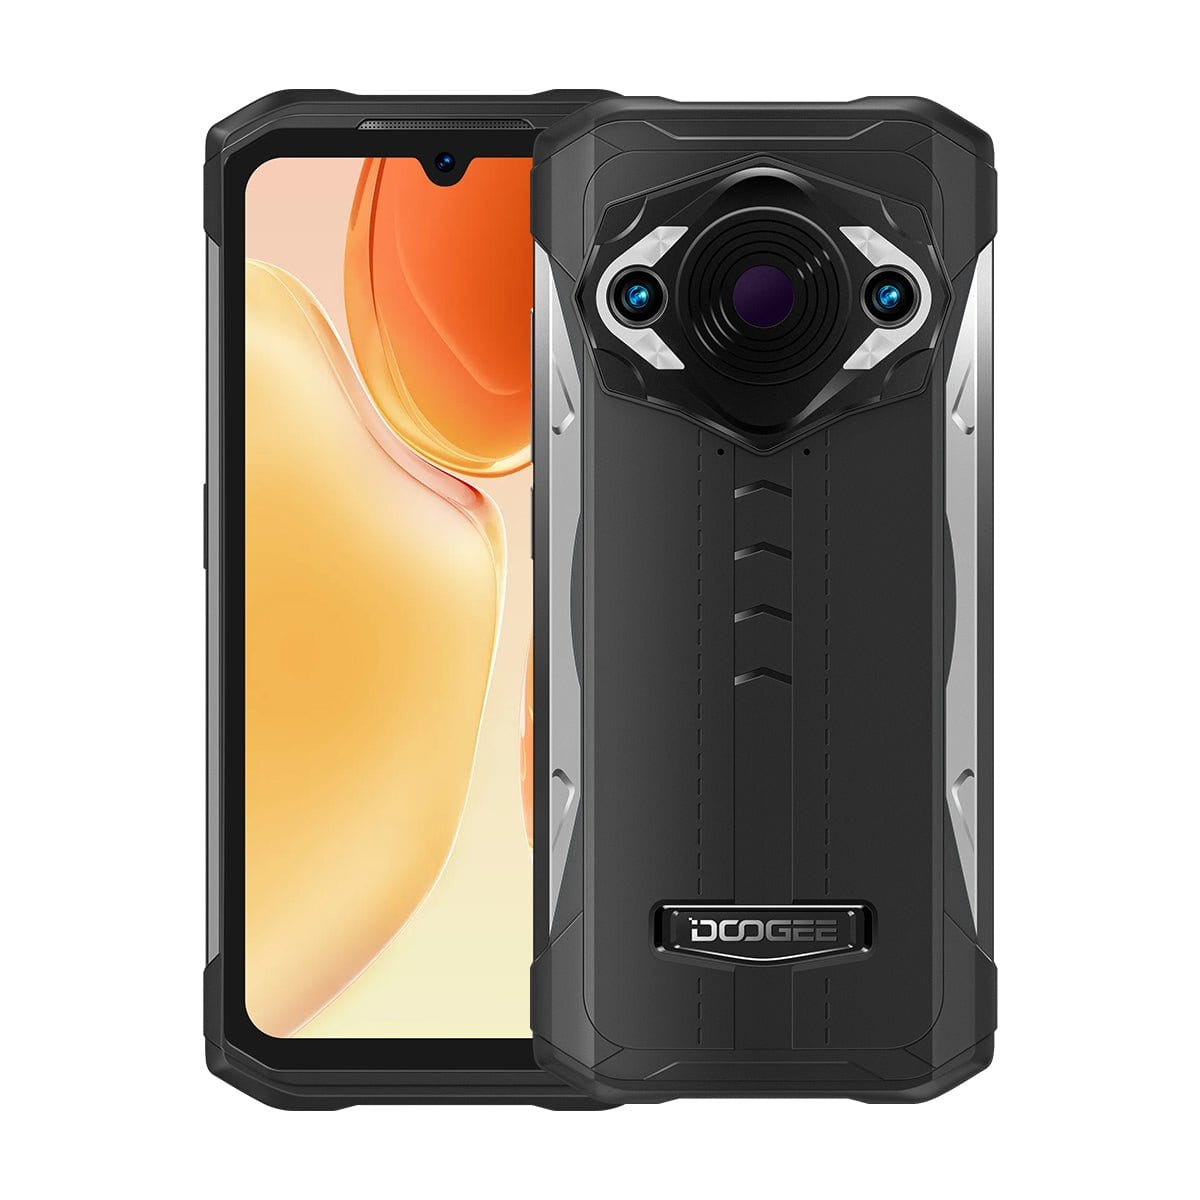 http://doogeemall.com/cdn/shop/products/doogee-s98-pro-8256gb-thermal-imaging-camera-rugged-smartphone-rugged-phone-doogee-doogee-896862.jpg?v=1684318081